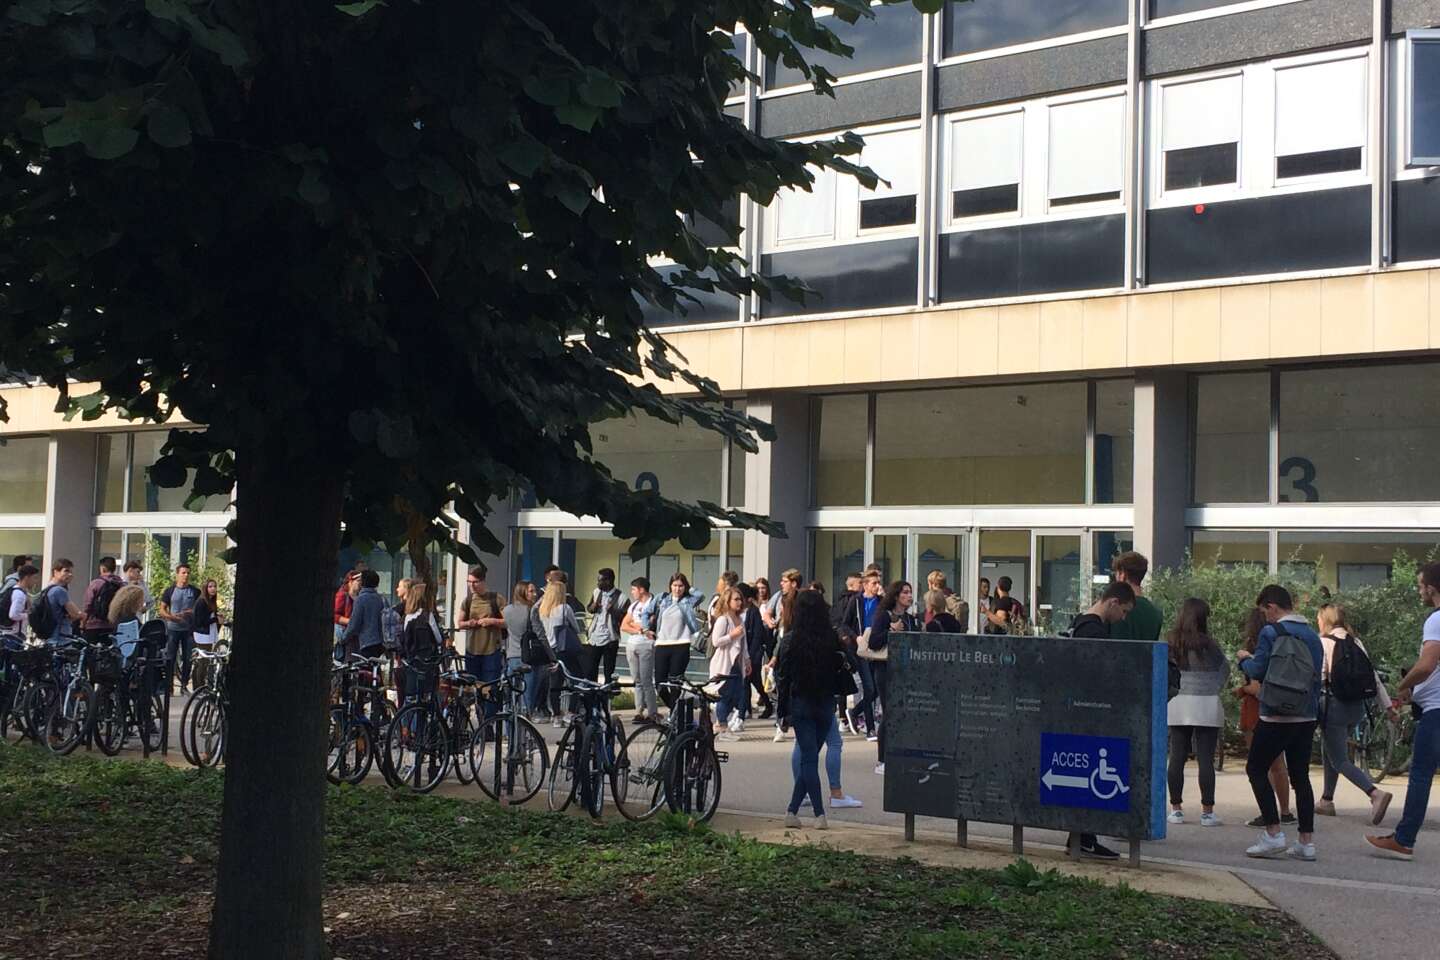 The University of Strasbourg is not afraid of the private sector